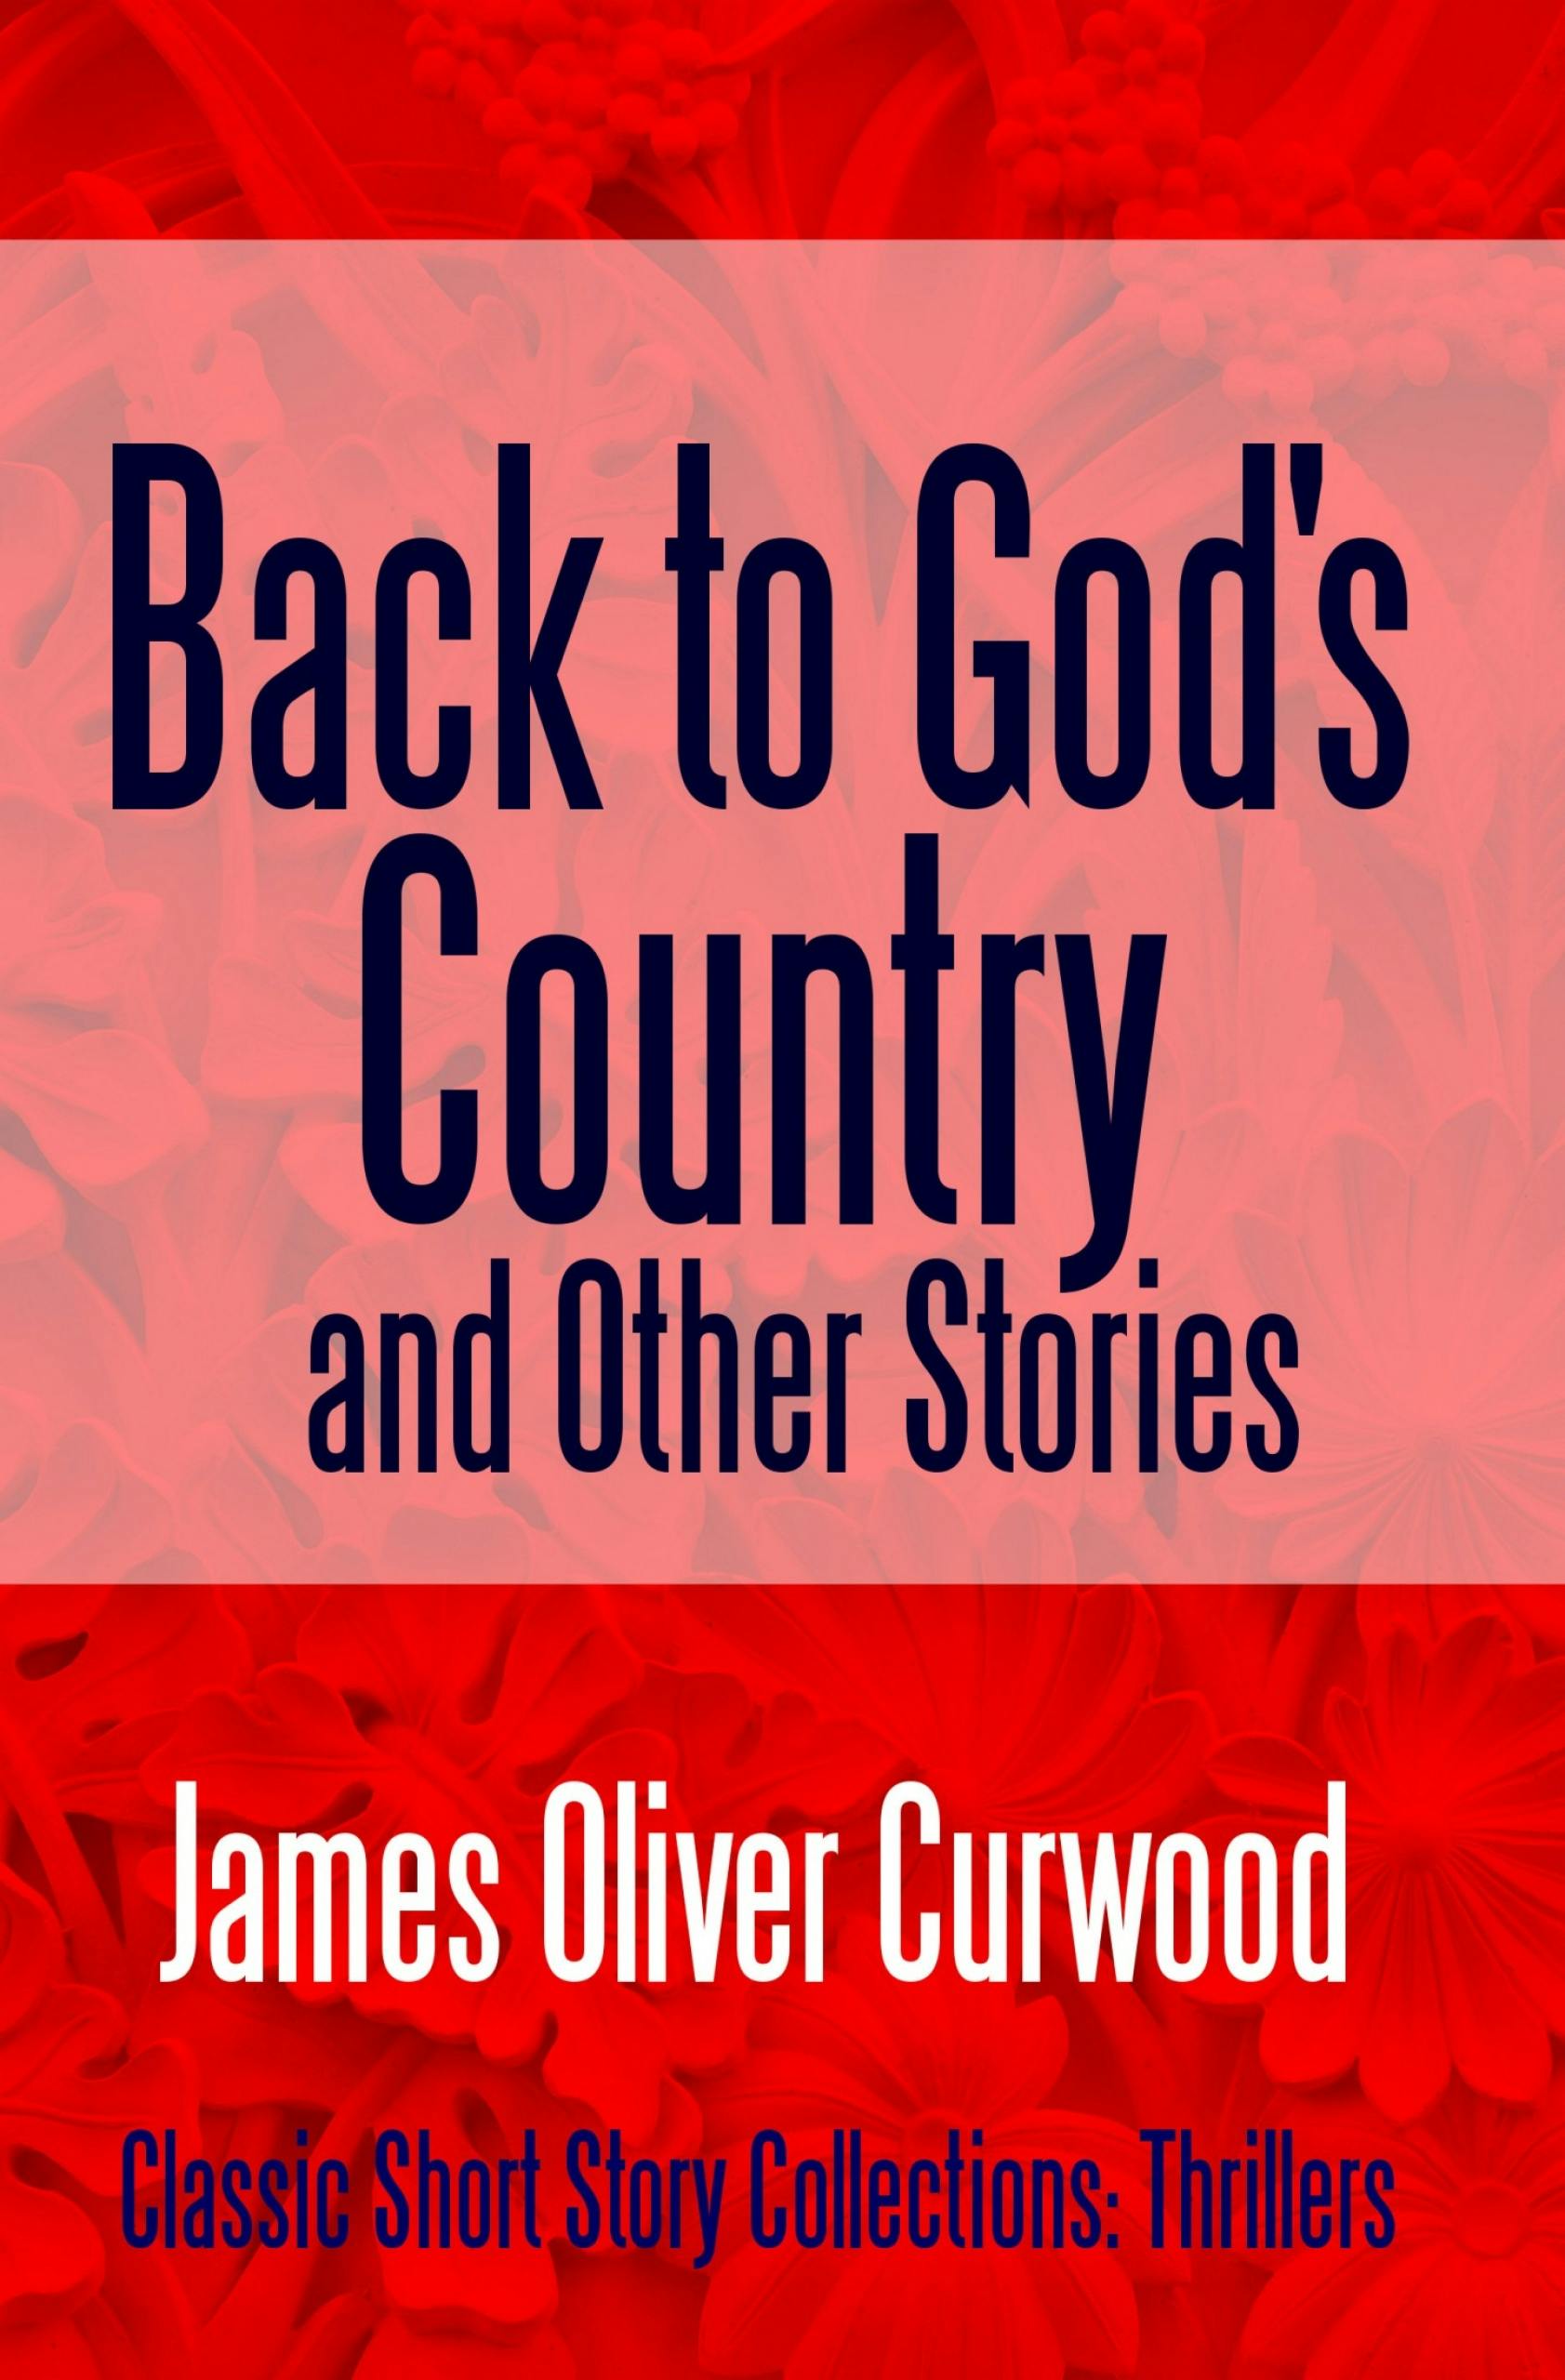 Back to God's Country and Other Stories - James Oliver Curwood